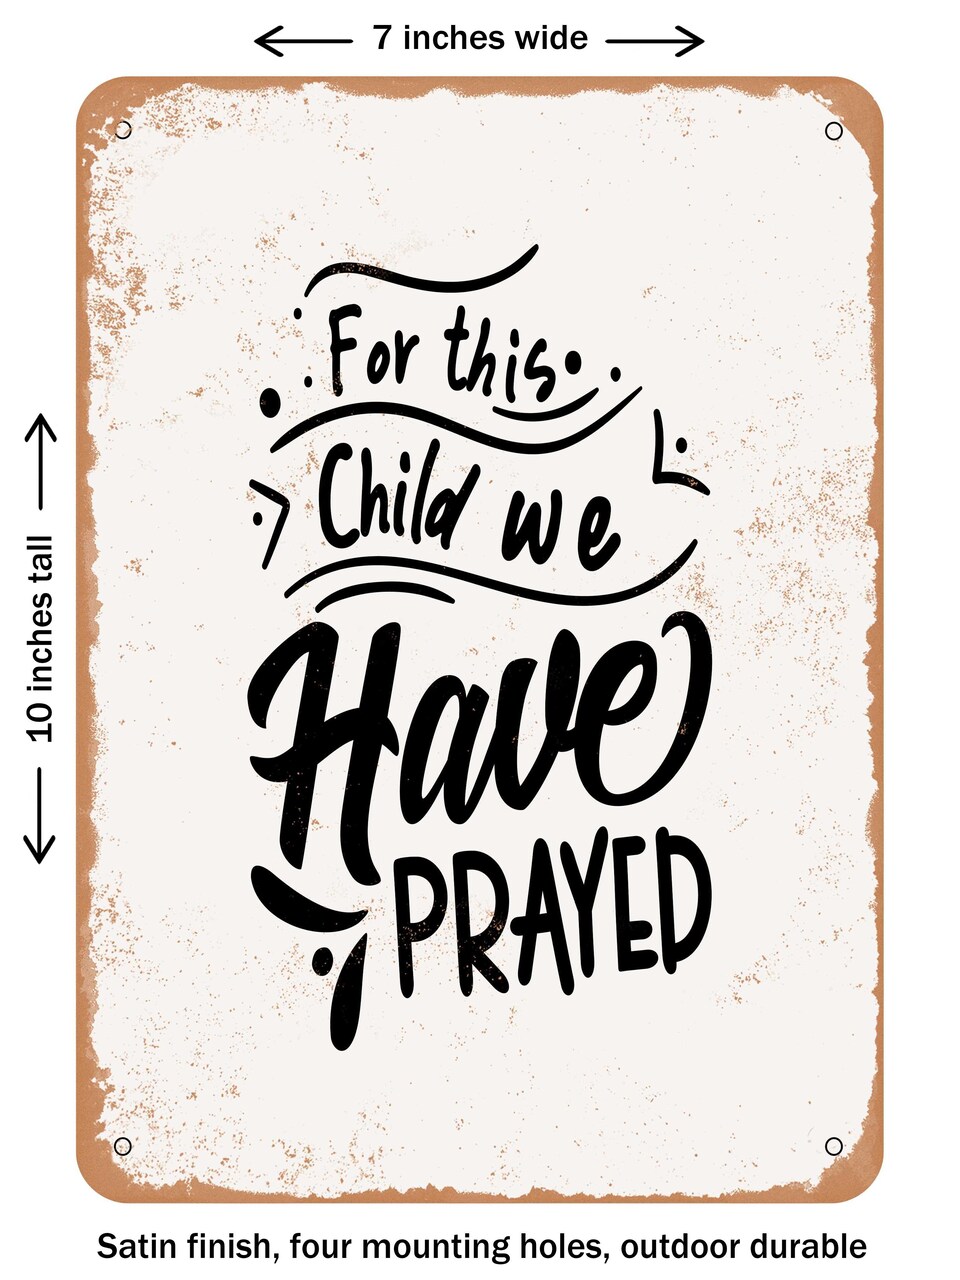 DECORATIVE METAL SIGN - For This Child We Have Prayed0  - Vintage Rusty Look